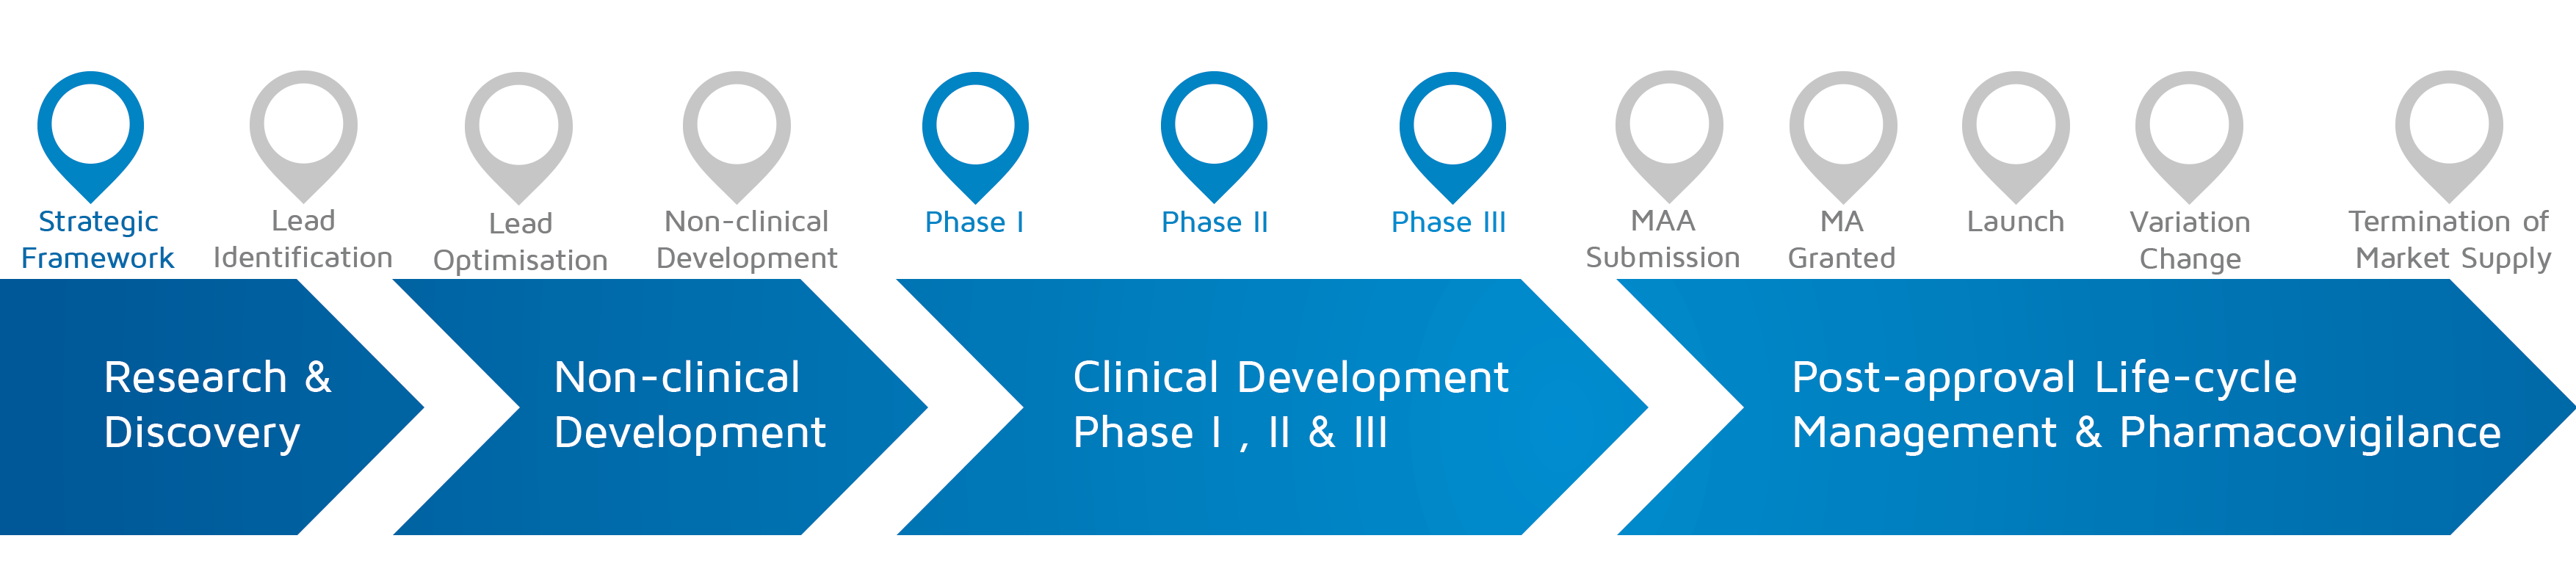 A visual representation of in which phase of medicines research and development process an activity takes place with strategic framework and Phase I-II-III highlighted.